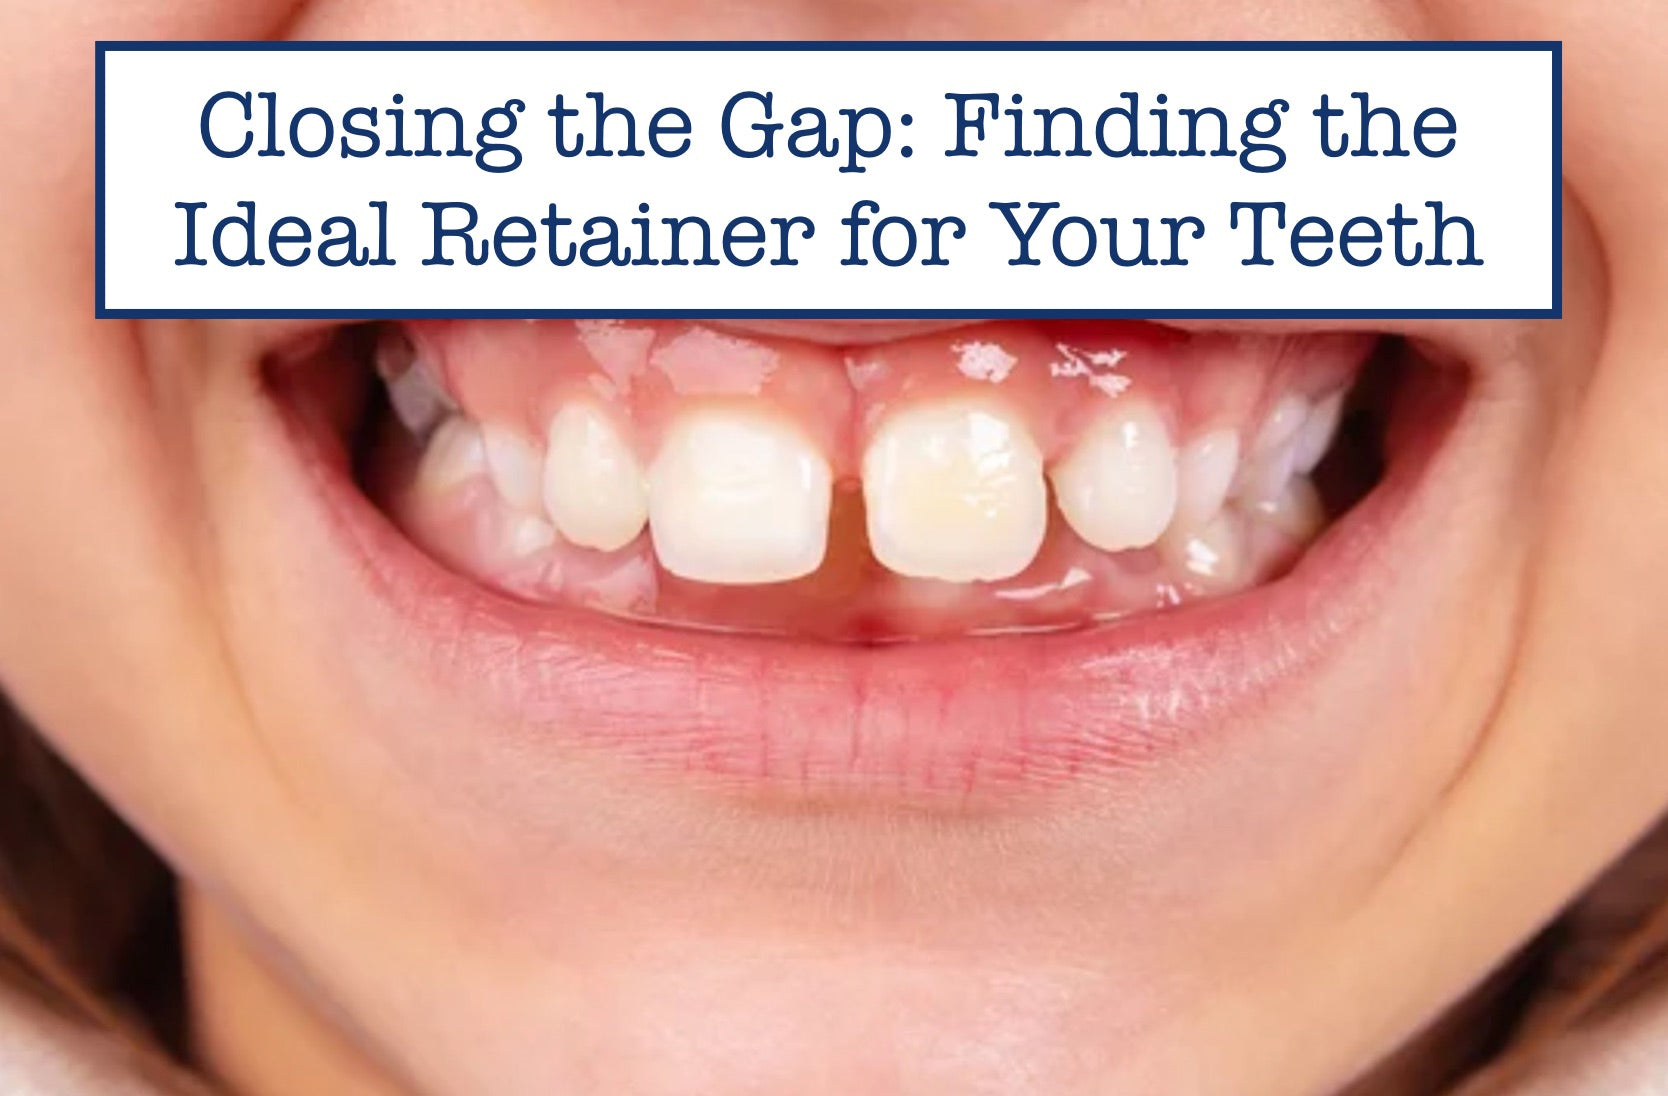 Closing the Gap: Finding the Ideal Retainer for Your Teeth